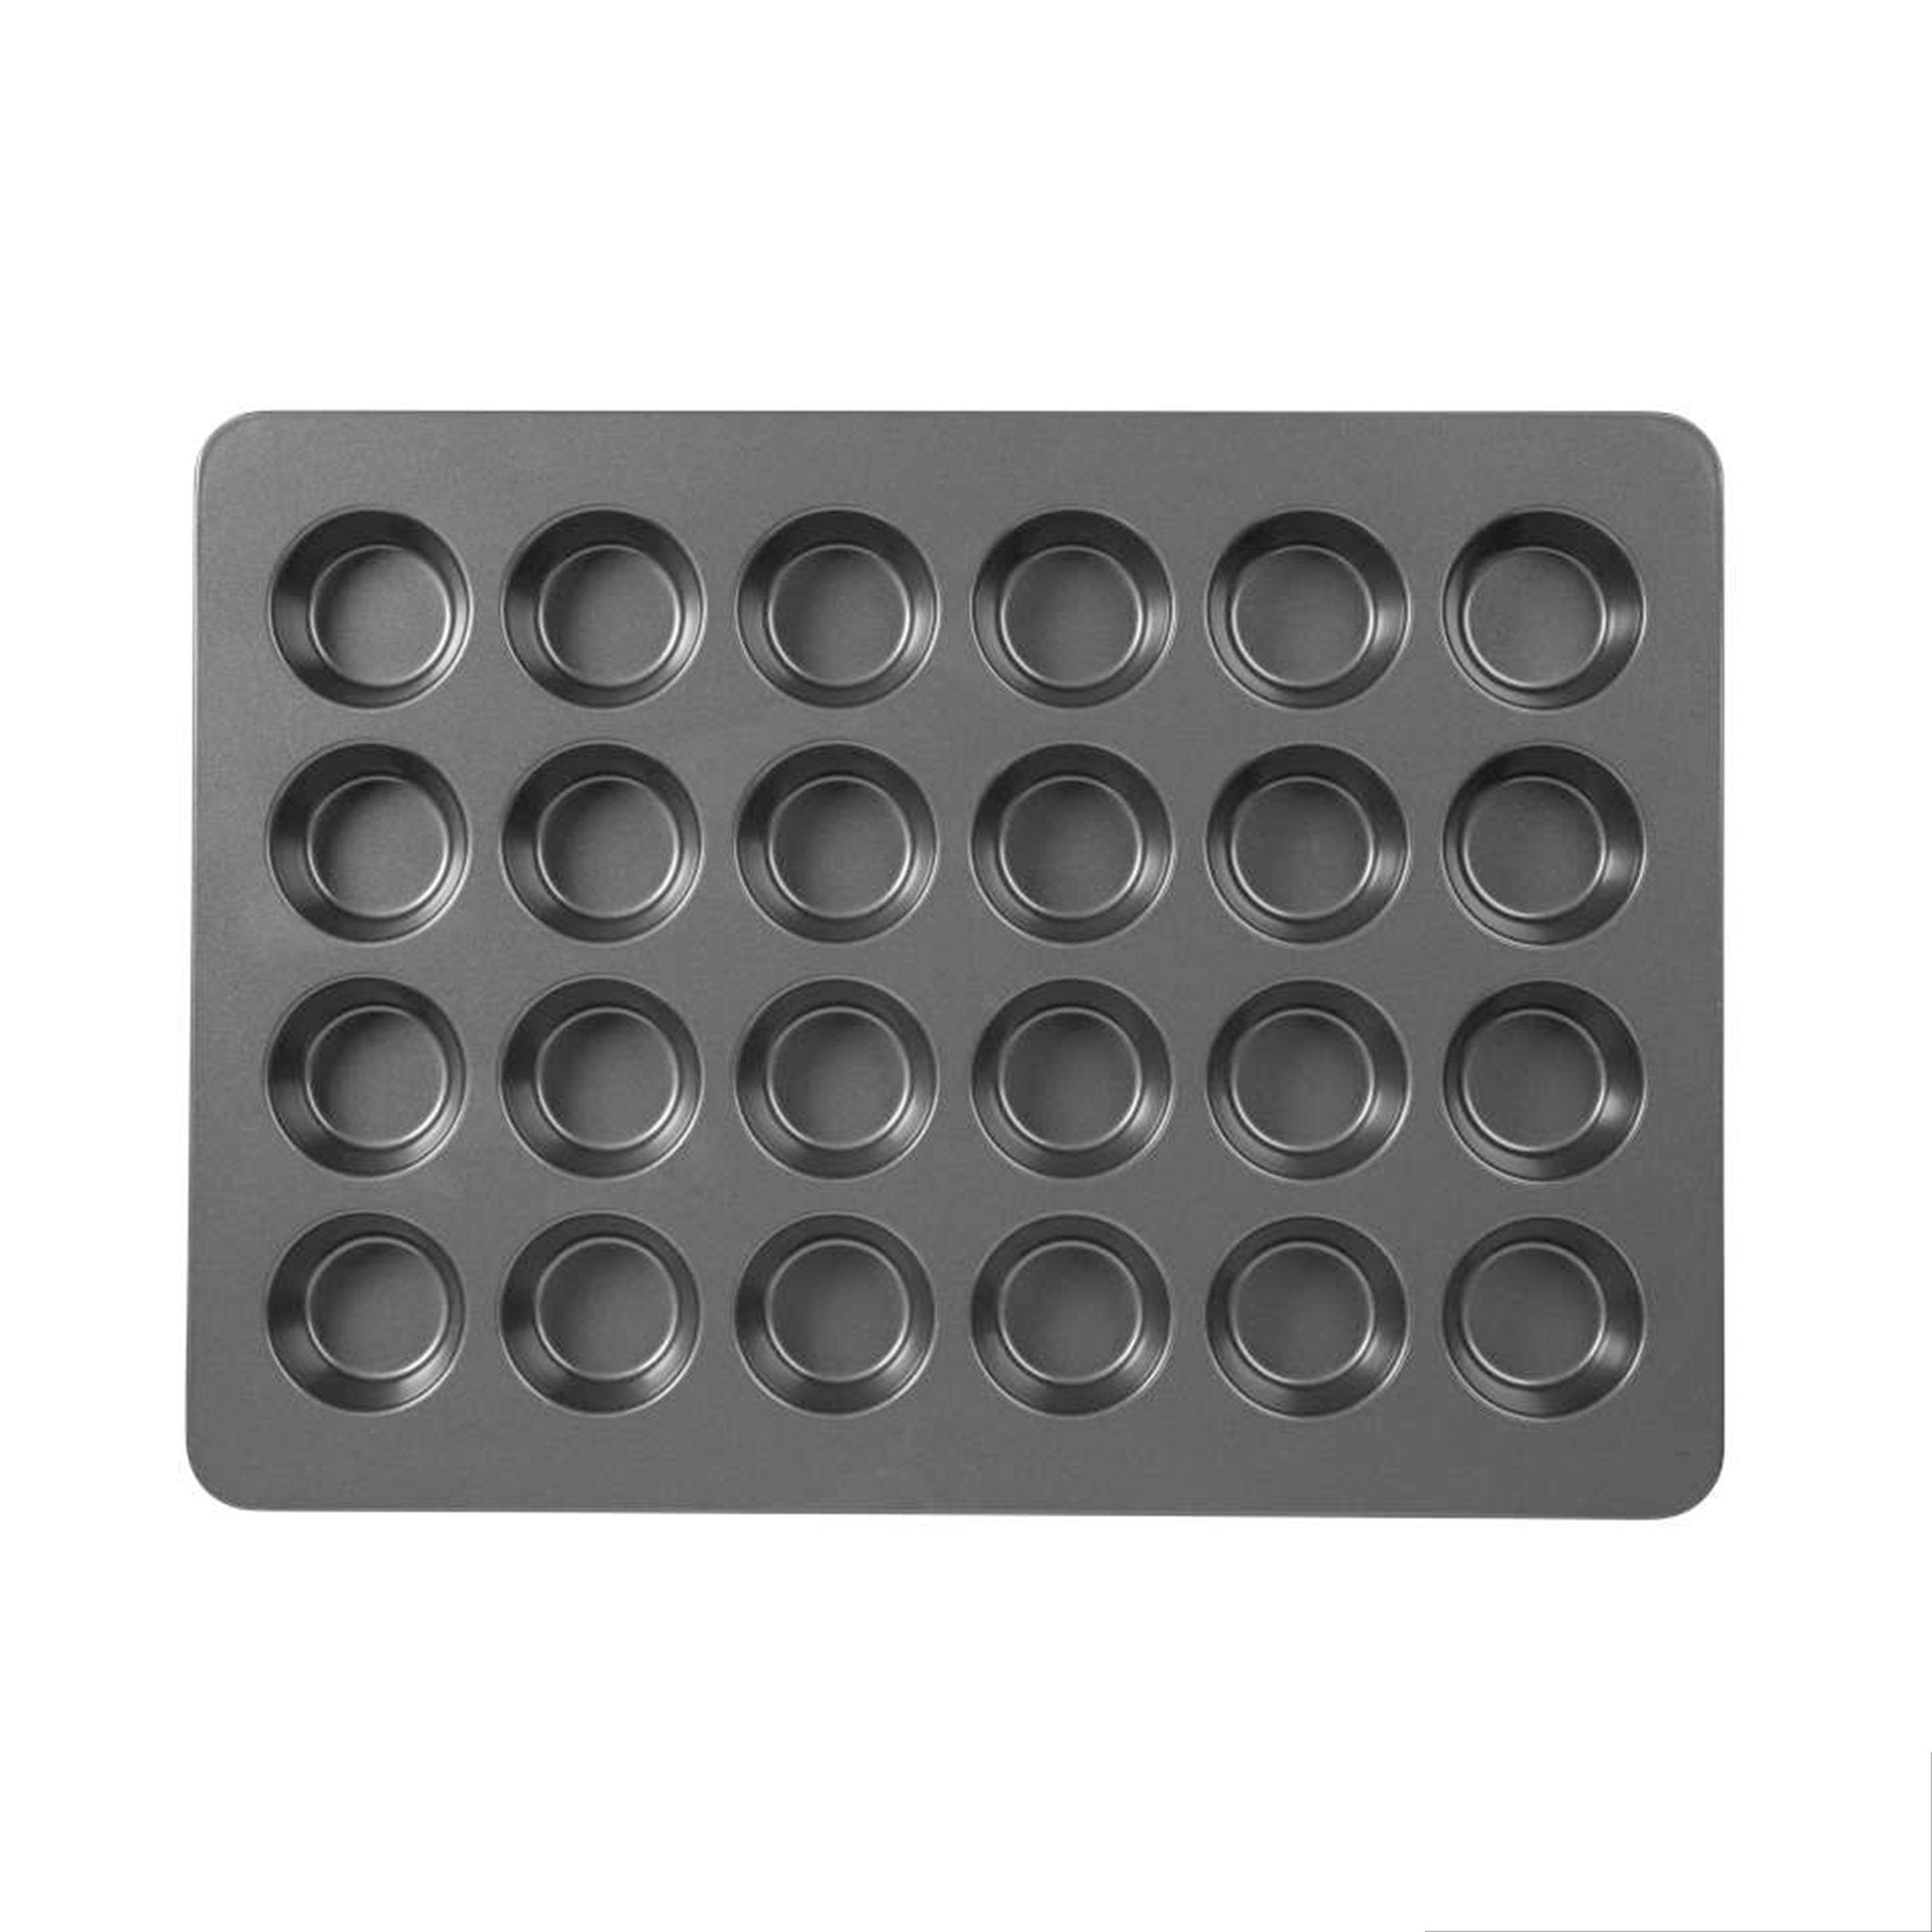 2338 muffin cupcake mould bakeware pan tray mould maker 24 slot round shape